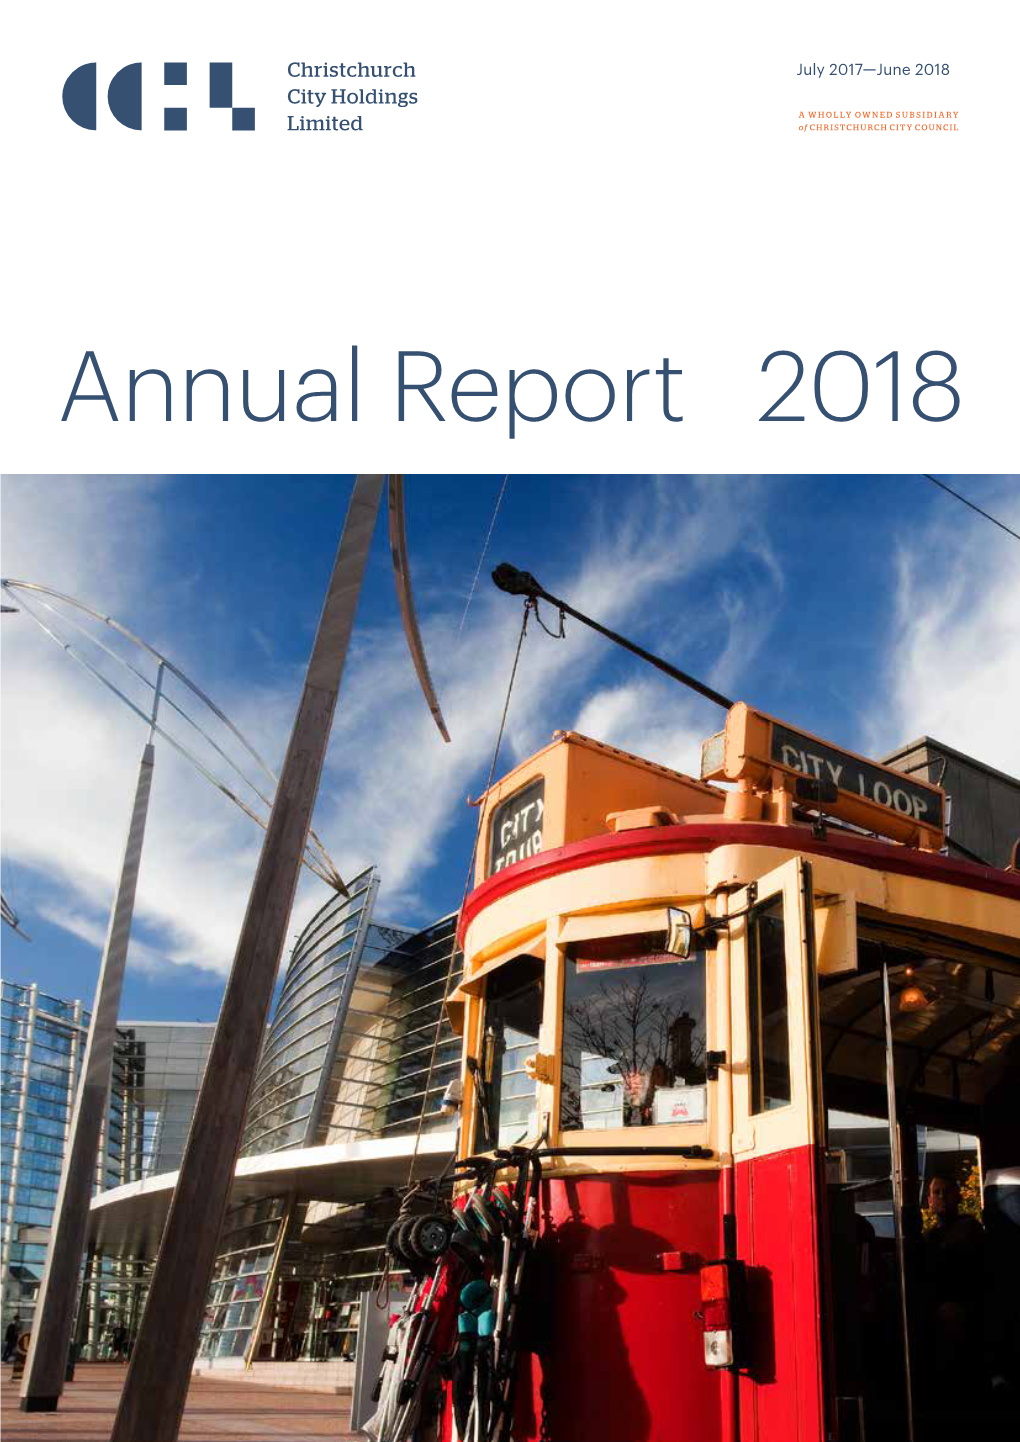 CCHL Annual Report 2018